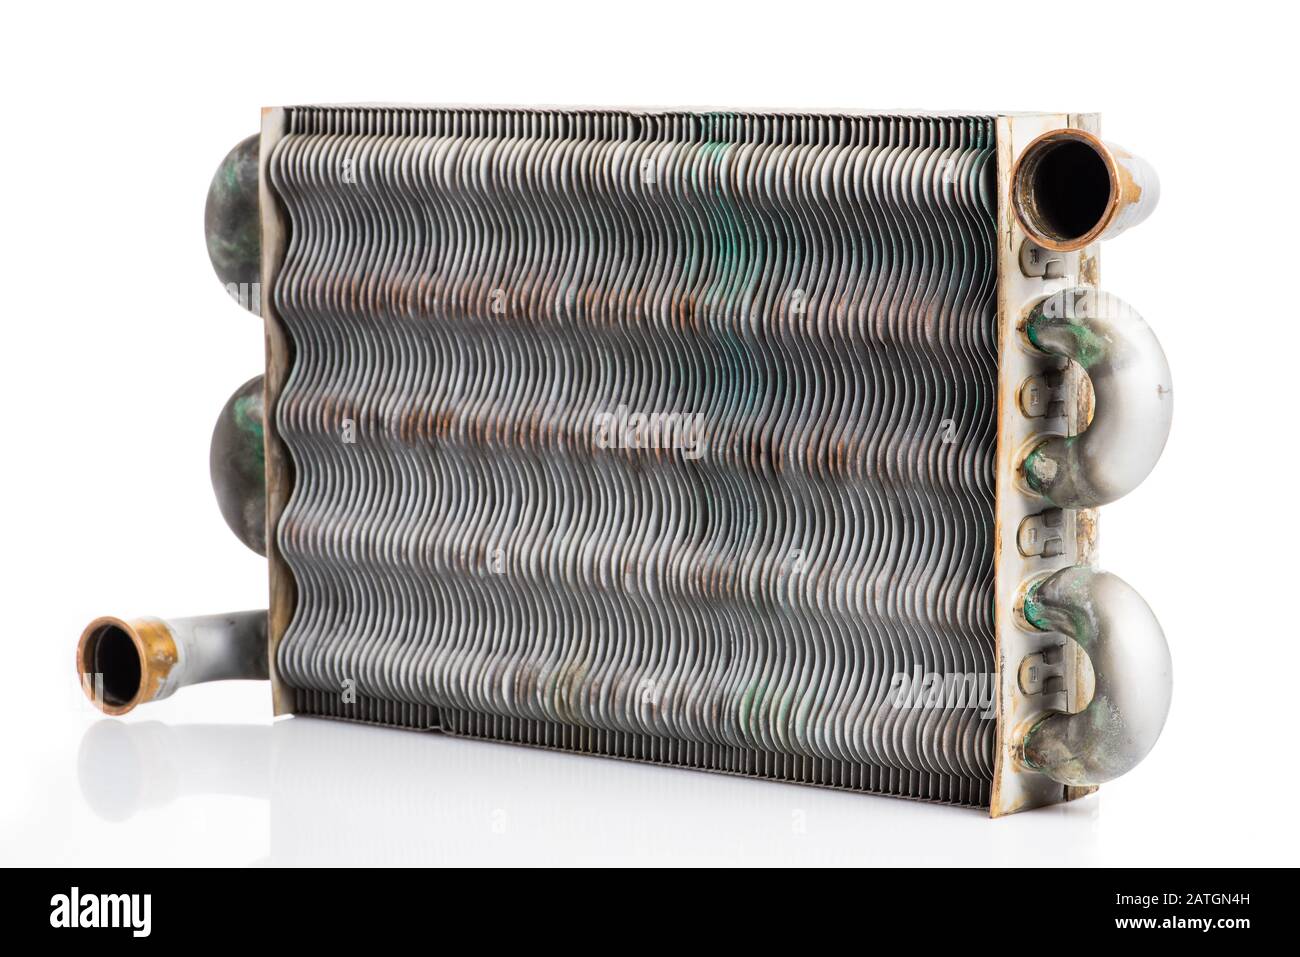 Old Heat Exchanger Isolated on White Background Stock Photo